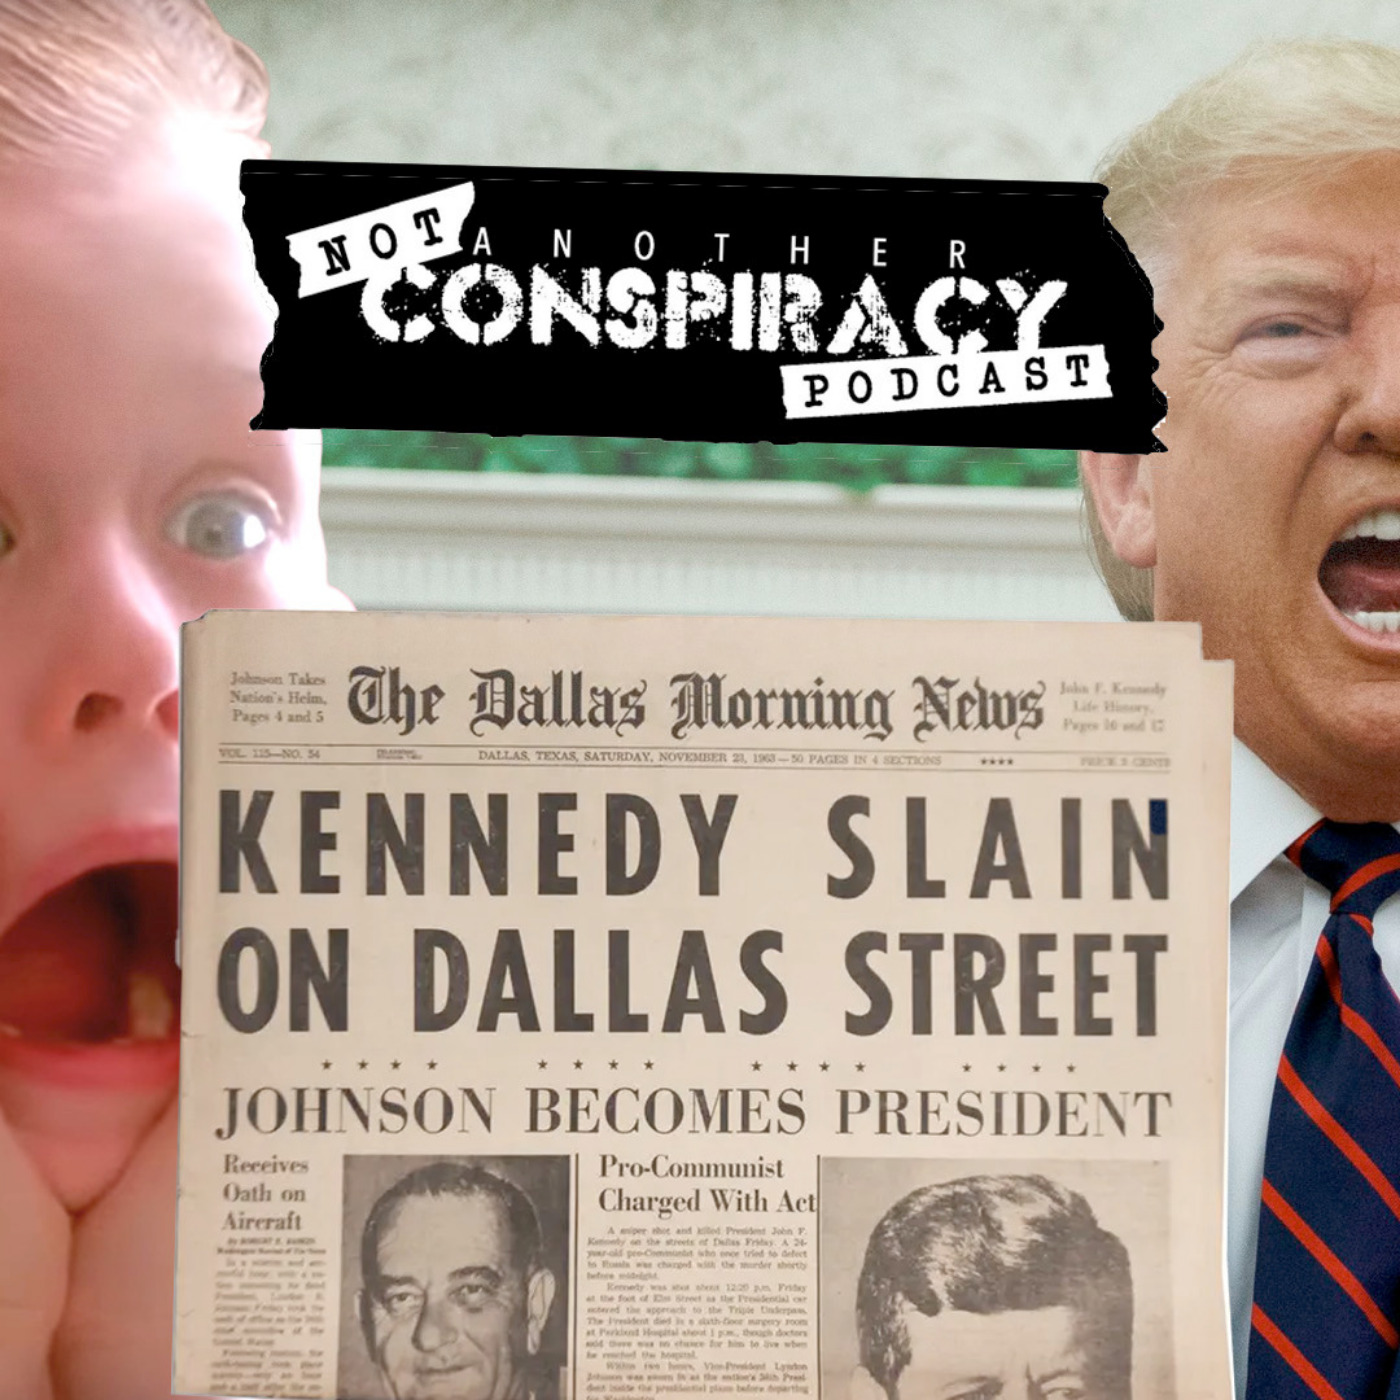 #7 - Did Macaulay Culkin Time Travel with Trump to assassinate  JFK?